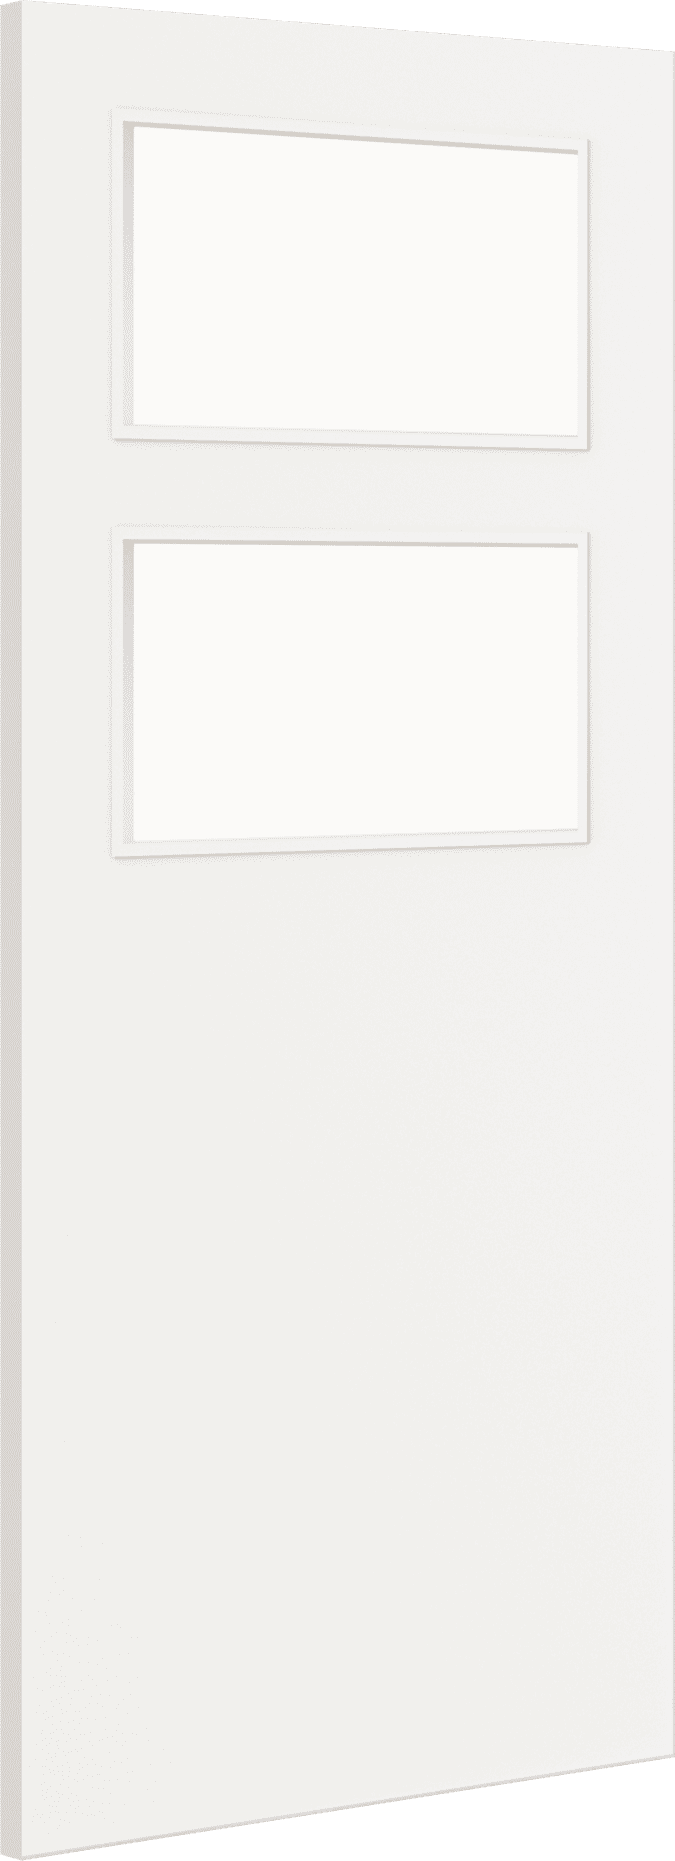 1981mm x 686mm x 44mm (27") Architectural Paint Grade White 02 Frosted Glazed Fire Door Blank